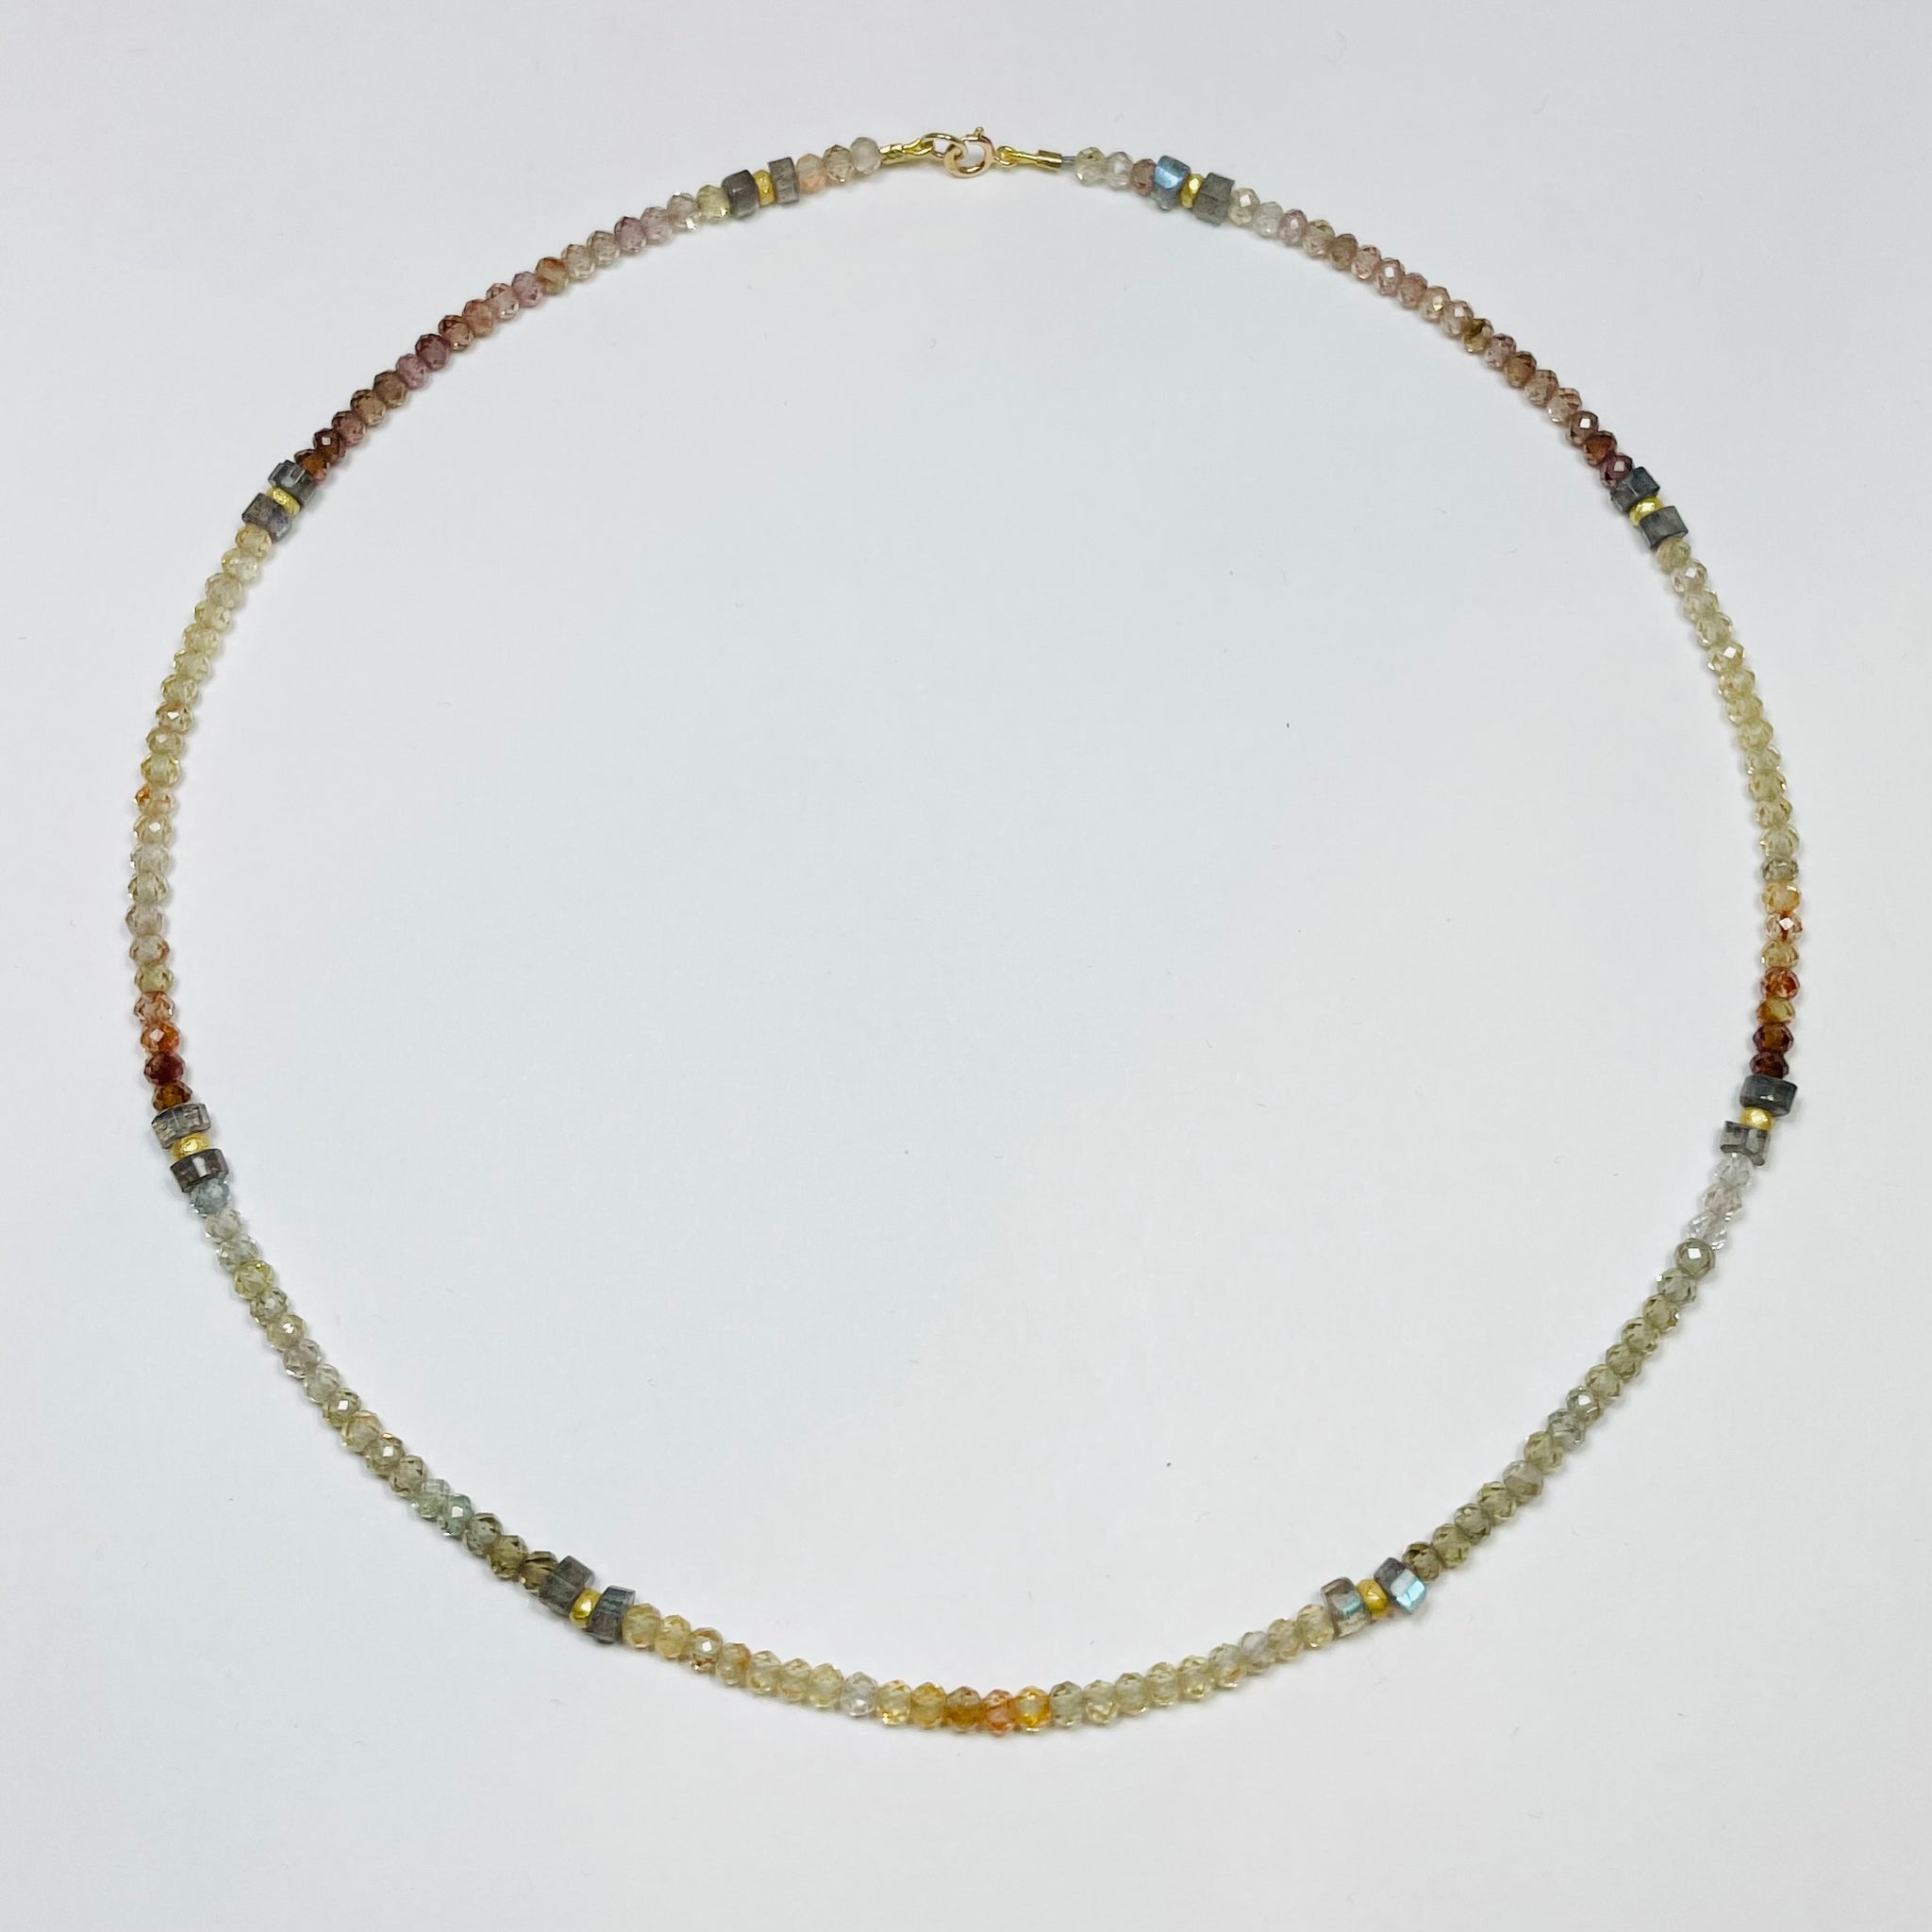 zircon necklace with turquoise and gold nuggets